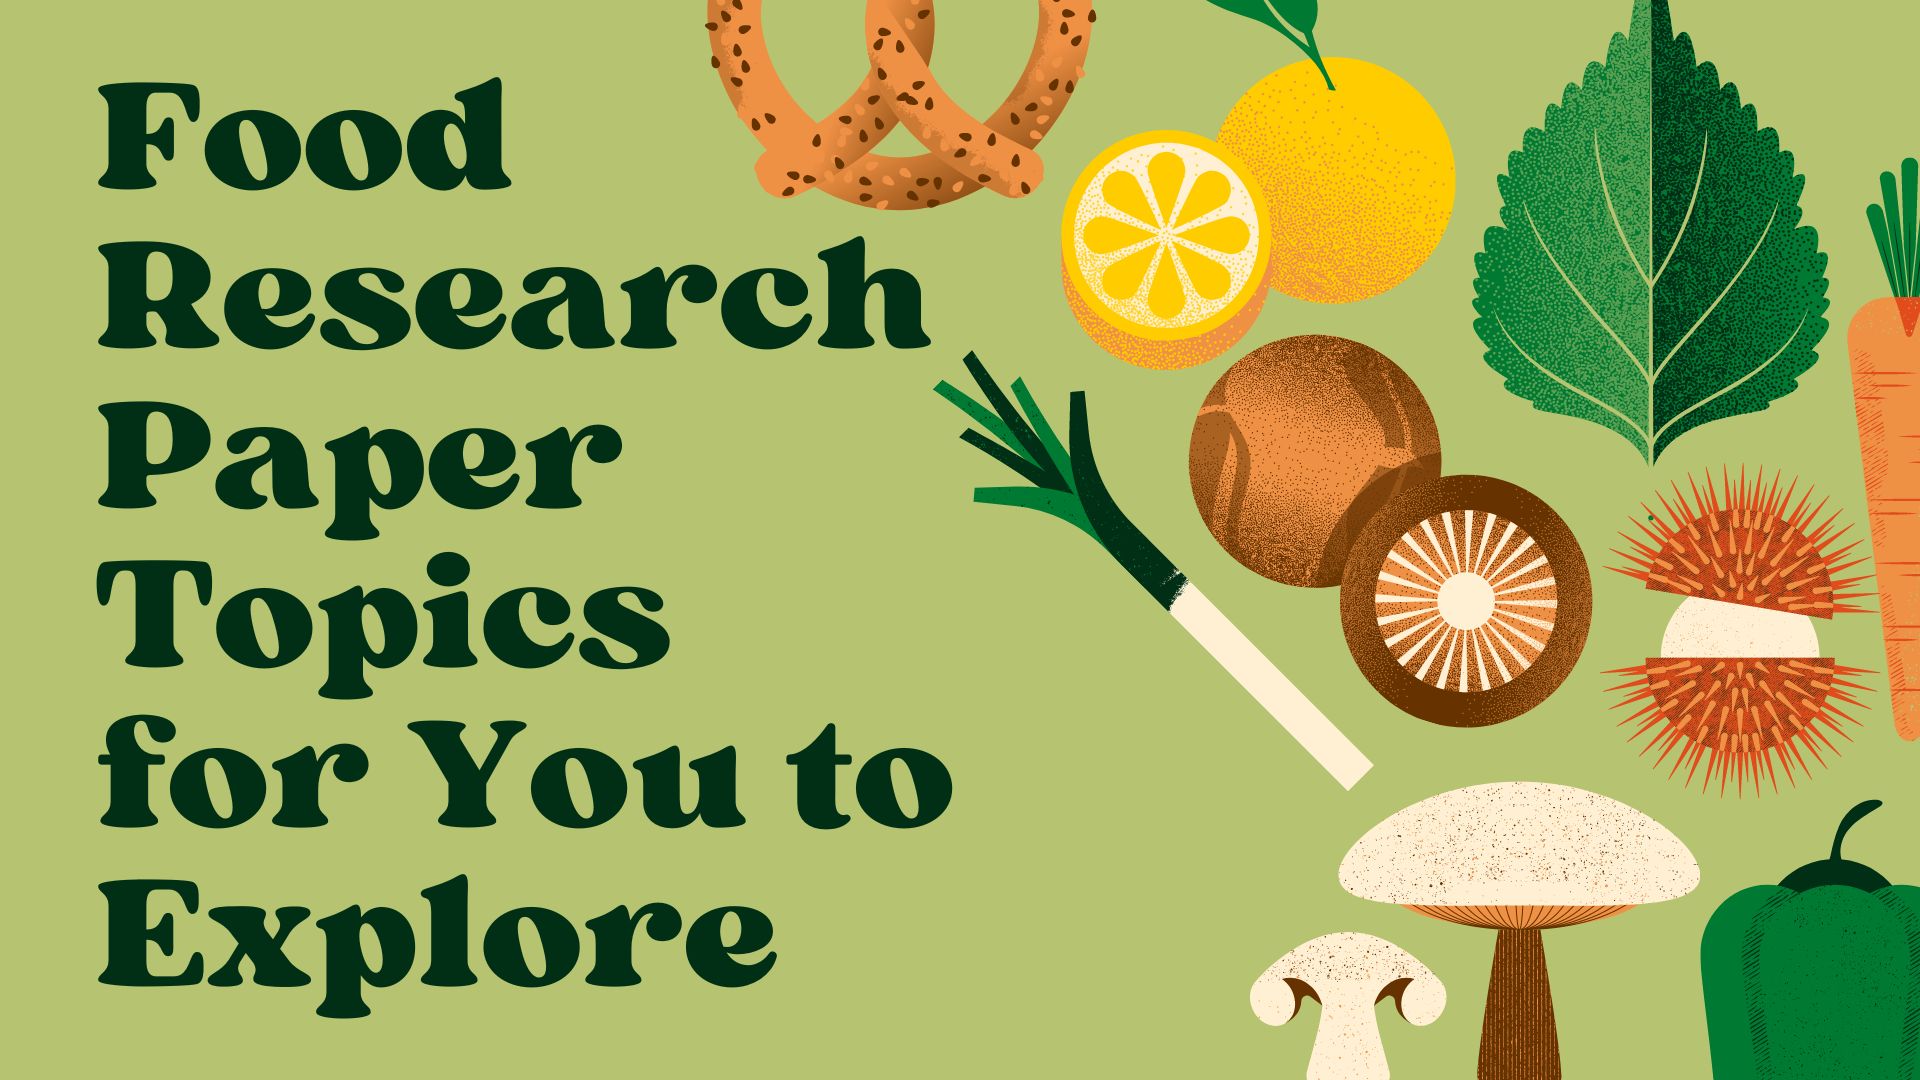 Green and White Illustrative Food Research Topics